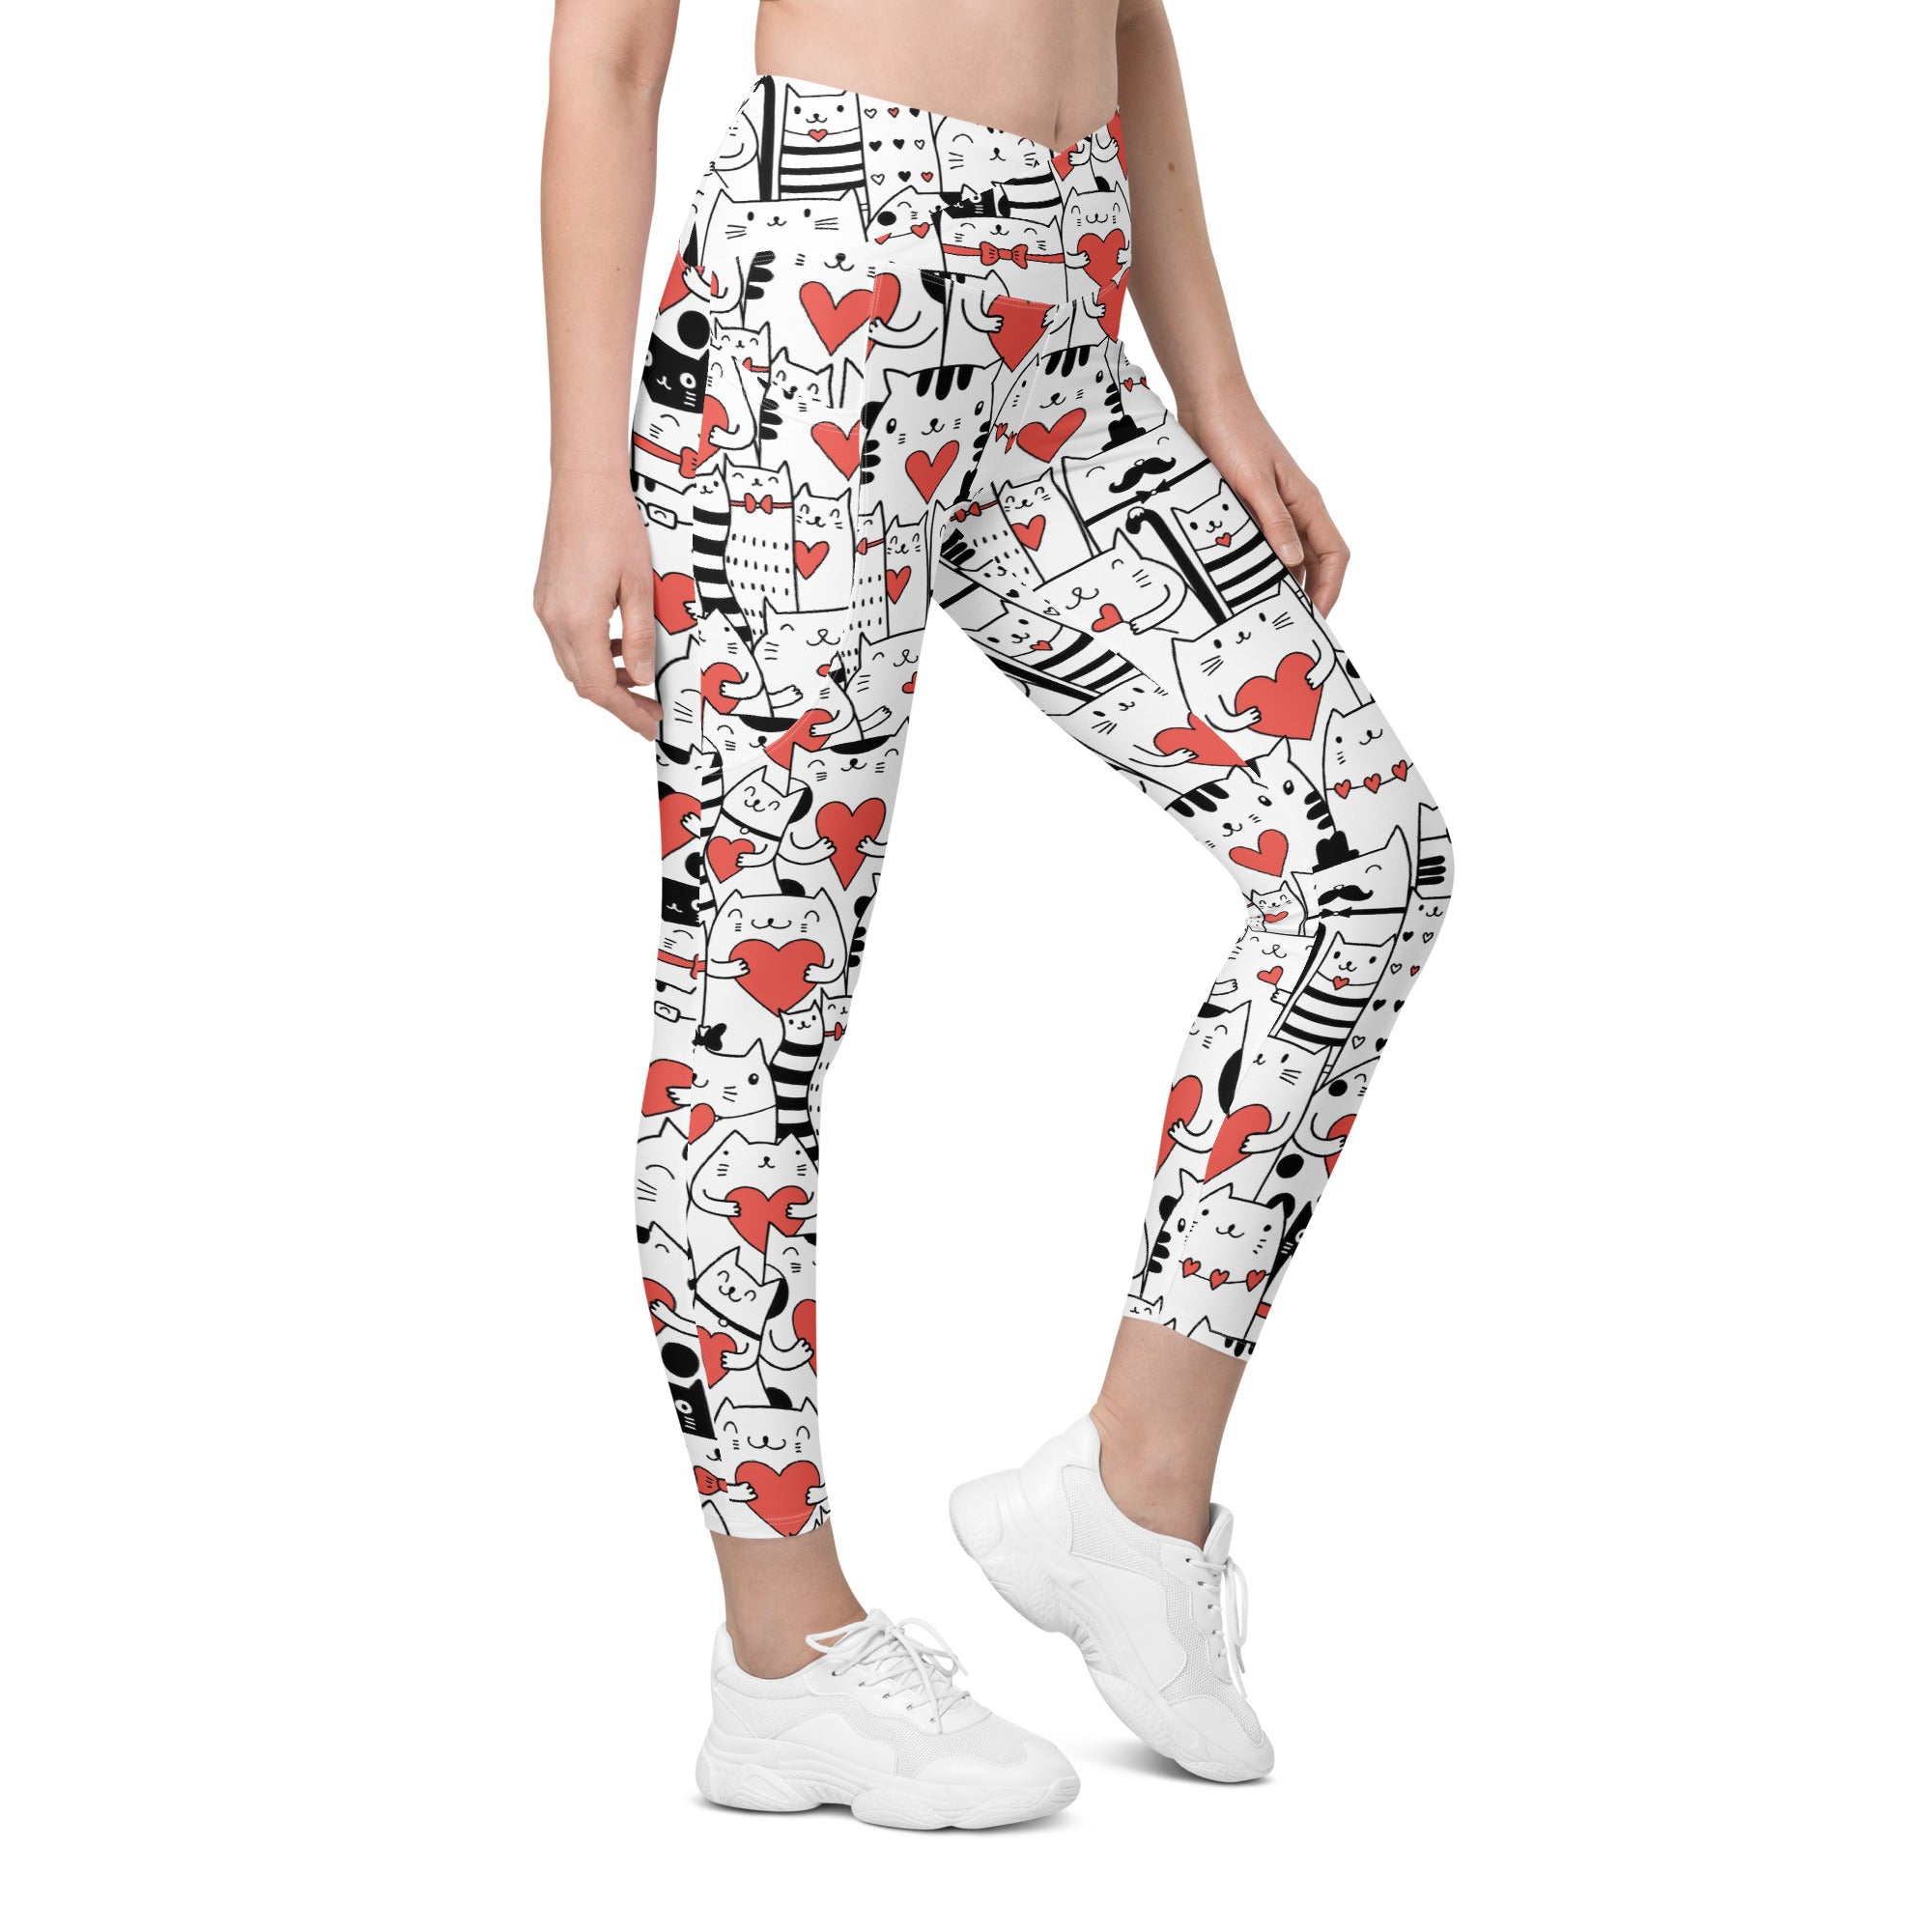 Kitties in Love Crossover Leggings With Pockets